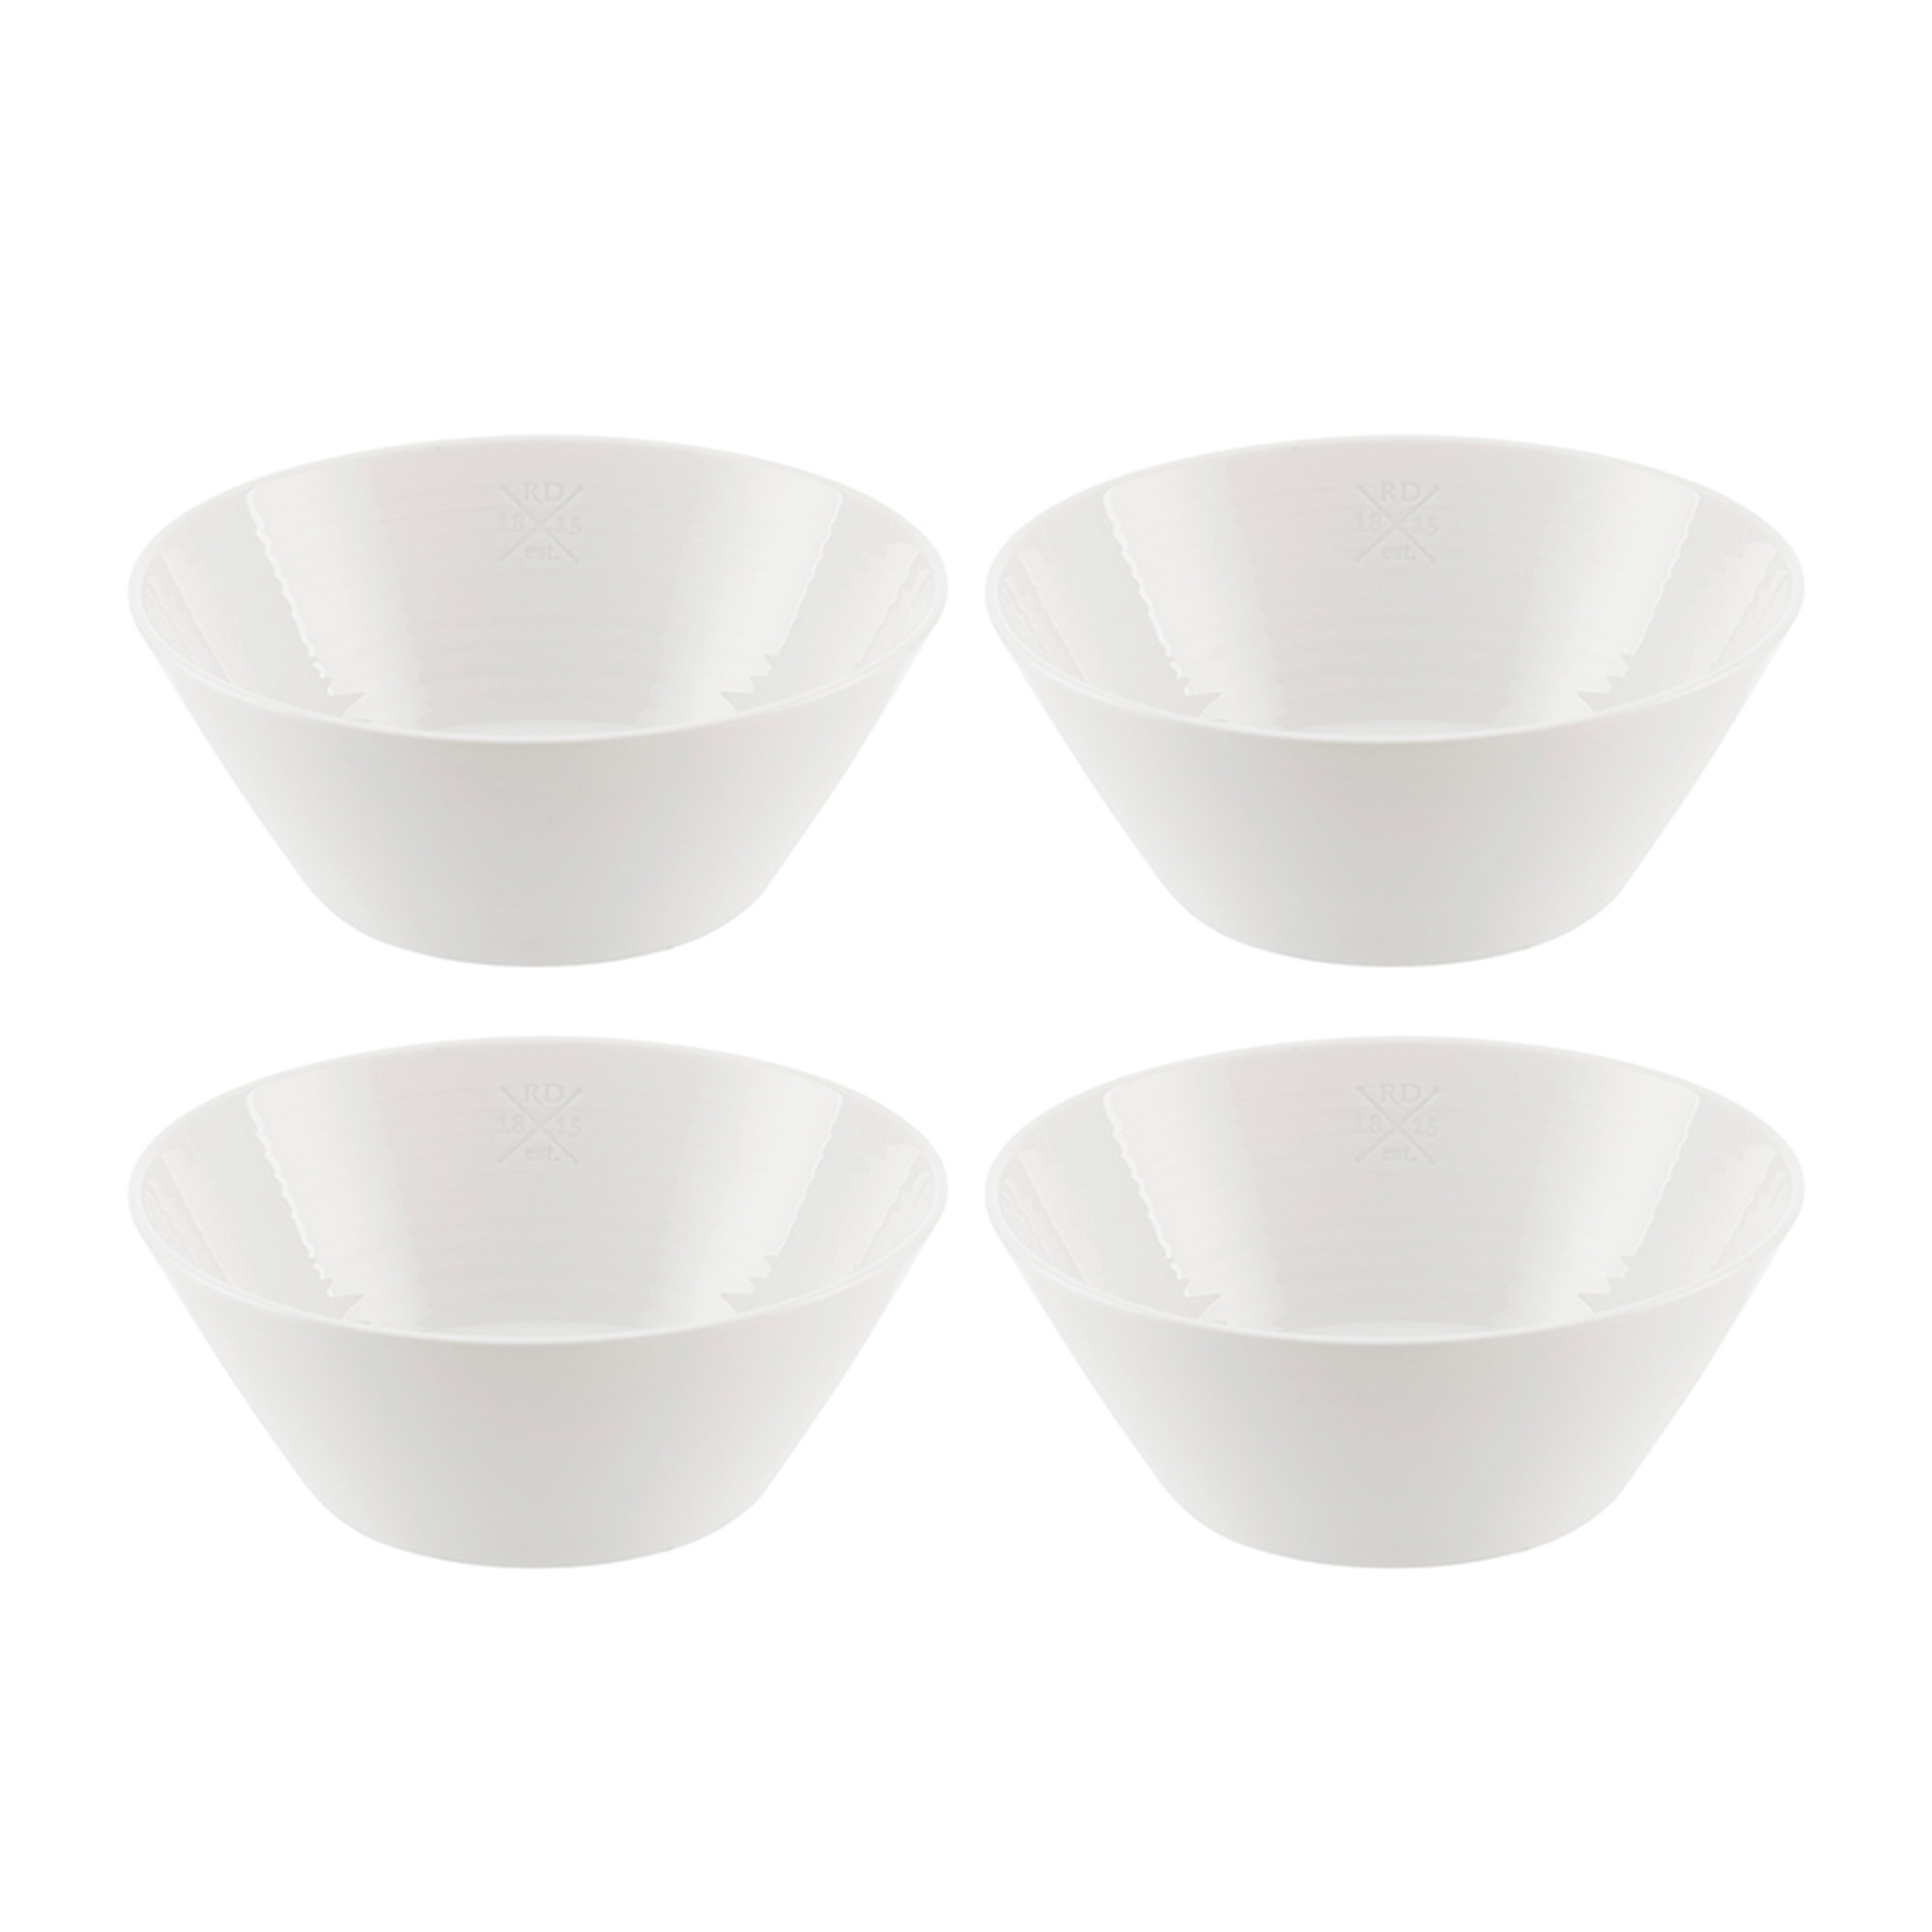 Royal Doulton 1815 Pure Cereal Bowl Set of 4 White Image 1